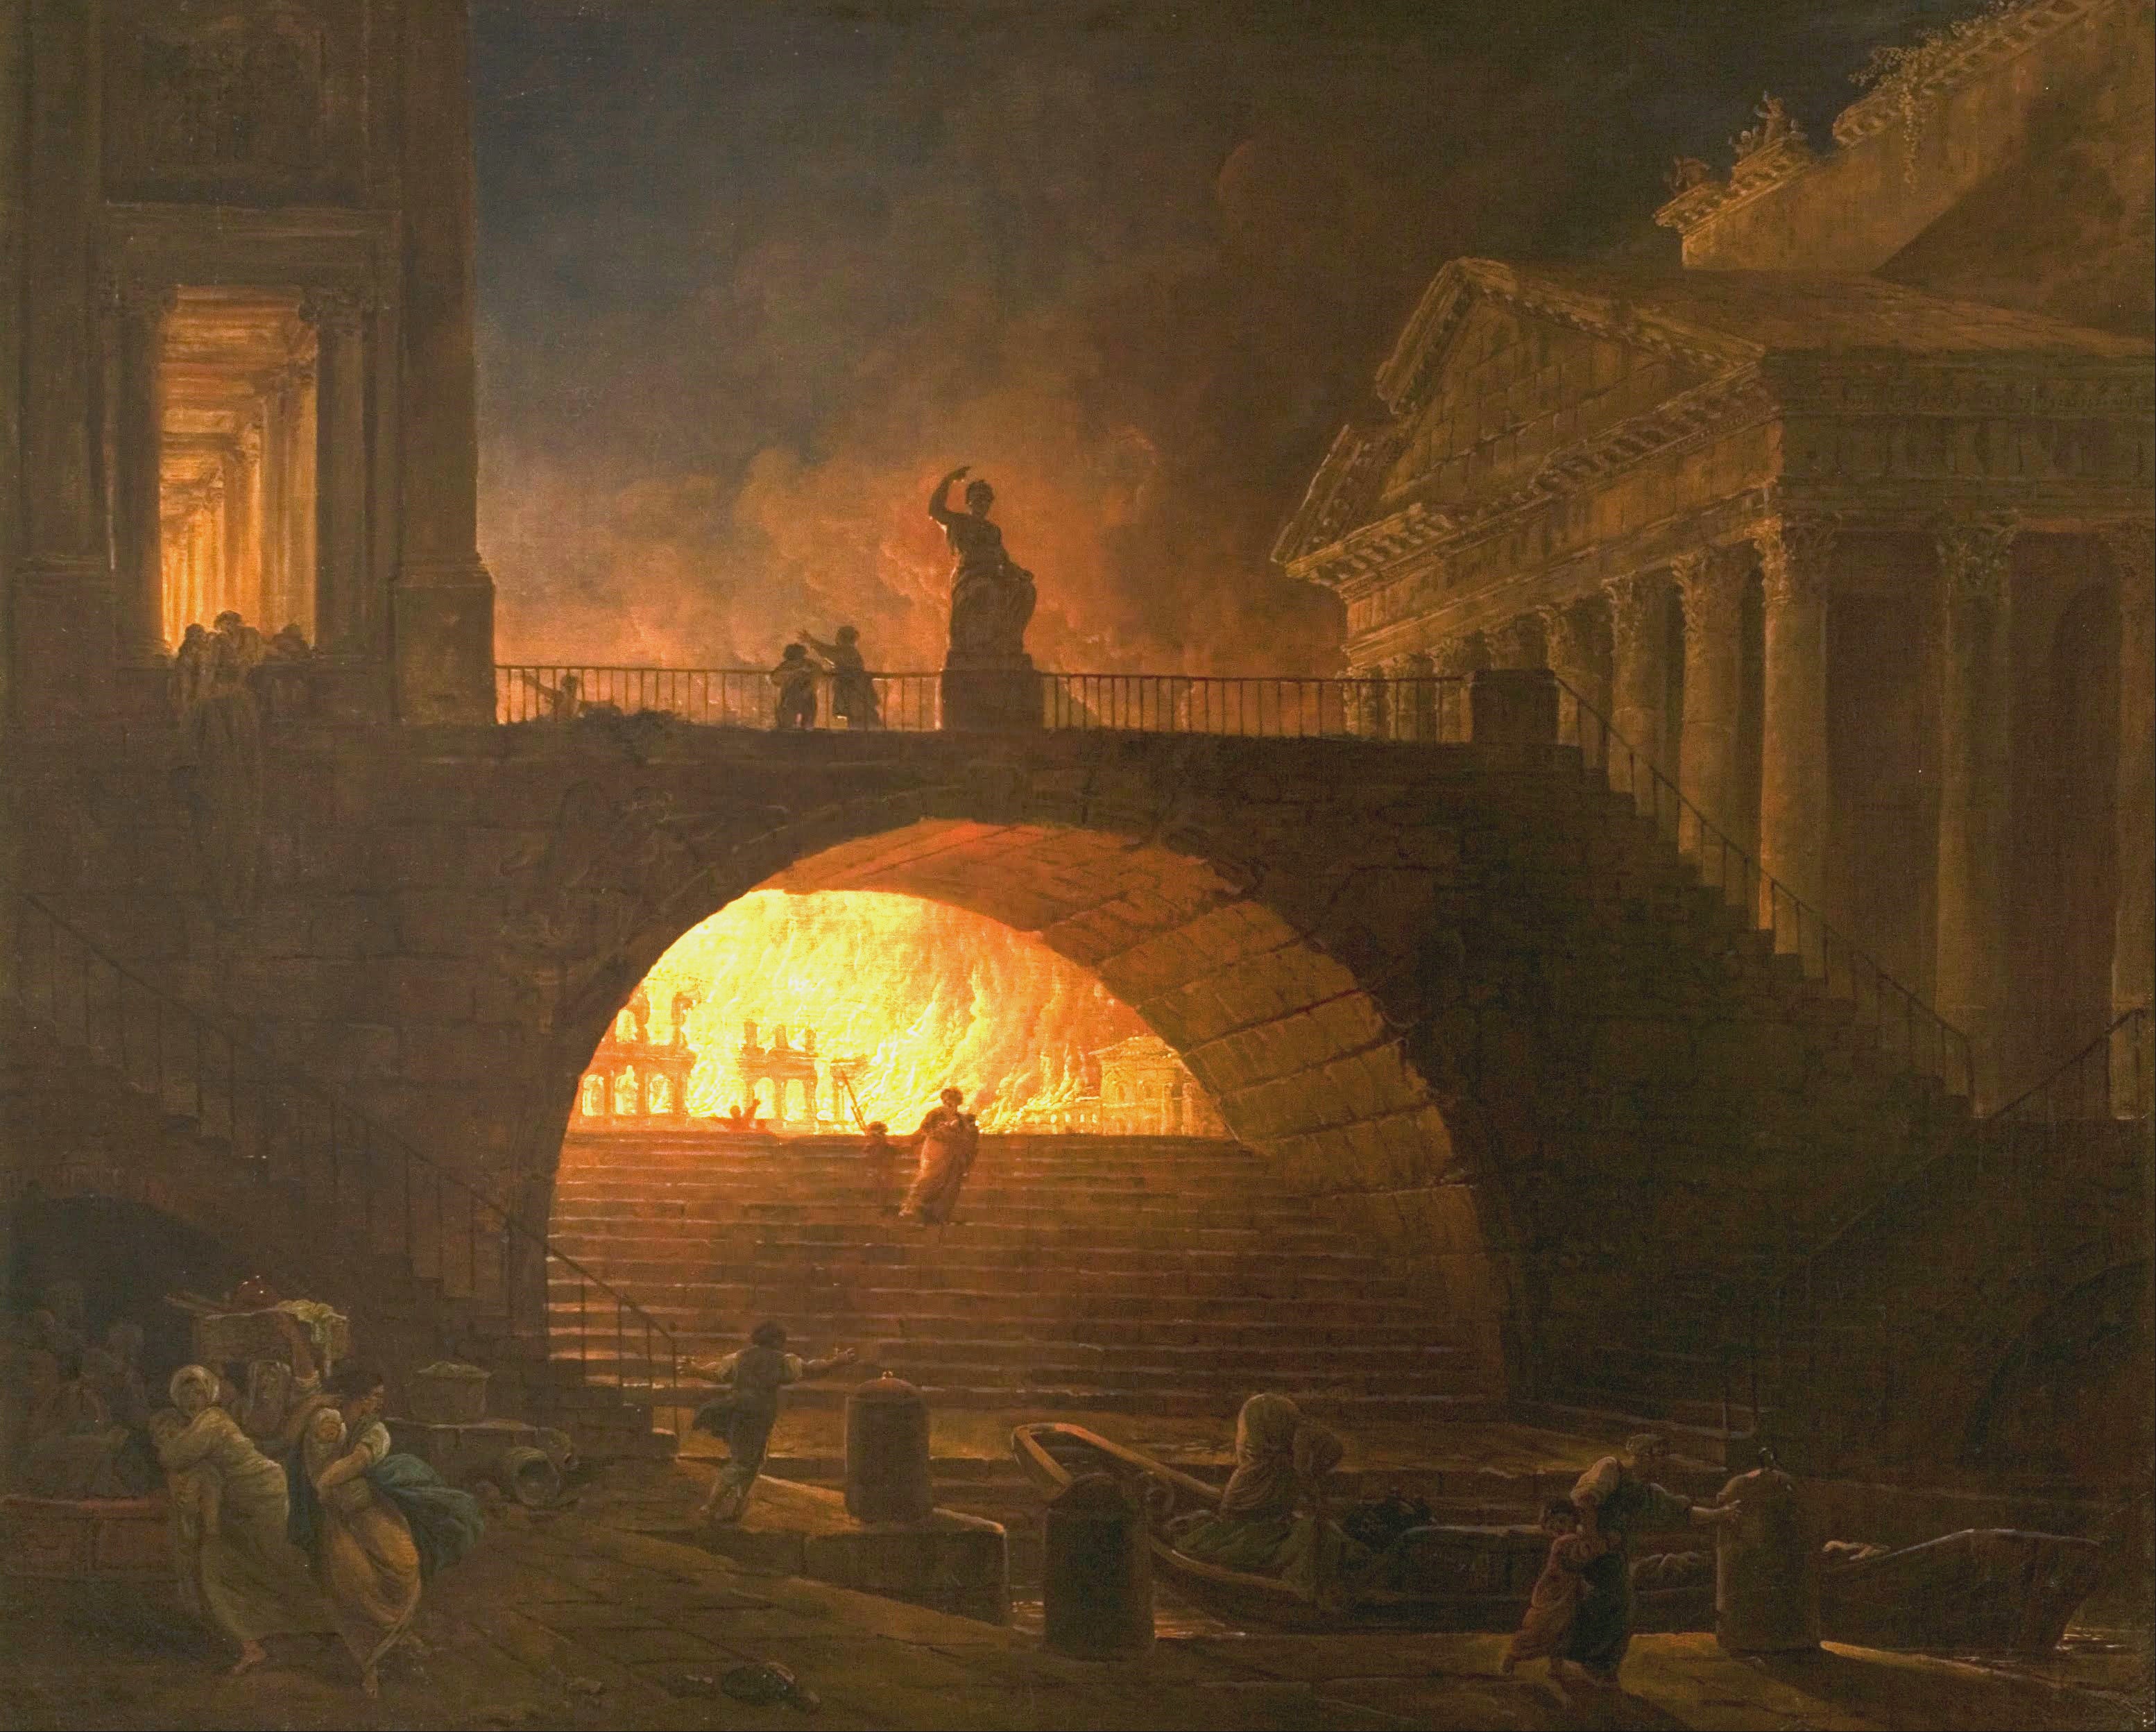 great-fire-rome-1.jpg The flames that changed the history of an empire. The Great Fire of Rome, as portrayed in an 18th-century painting by the French artist, Hubert Robert.